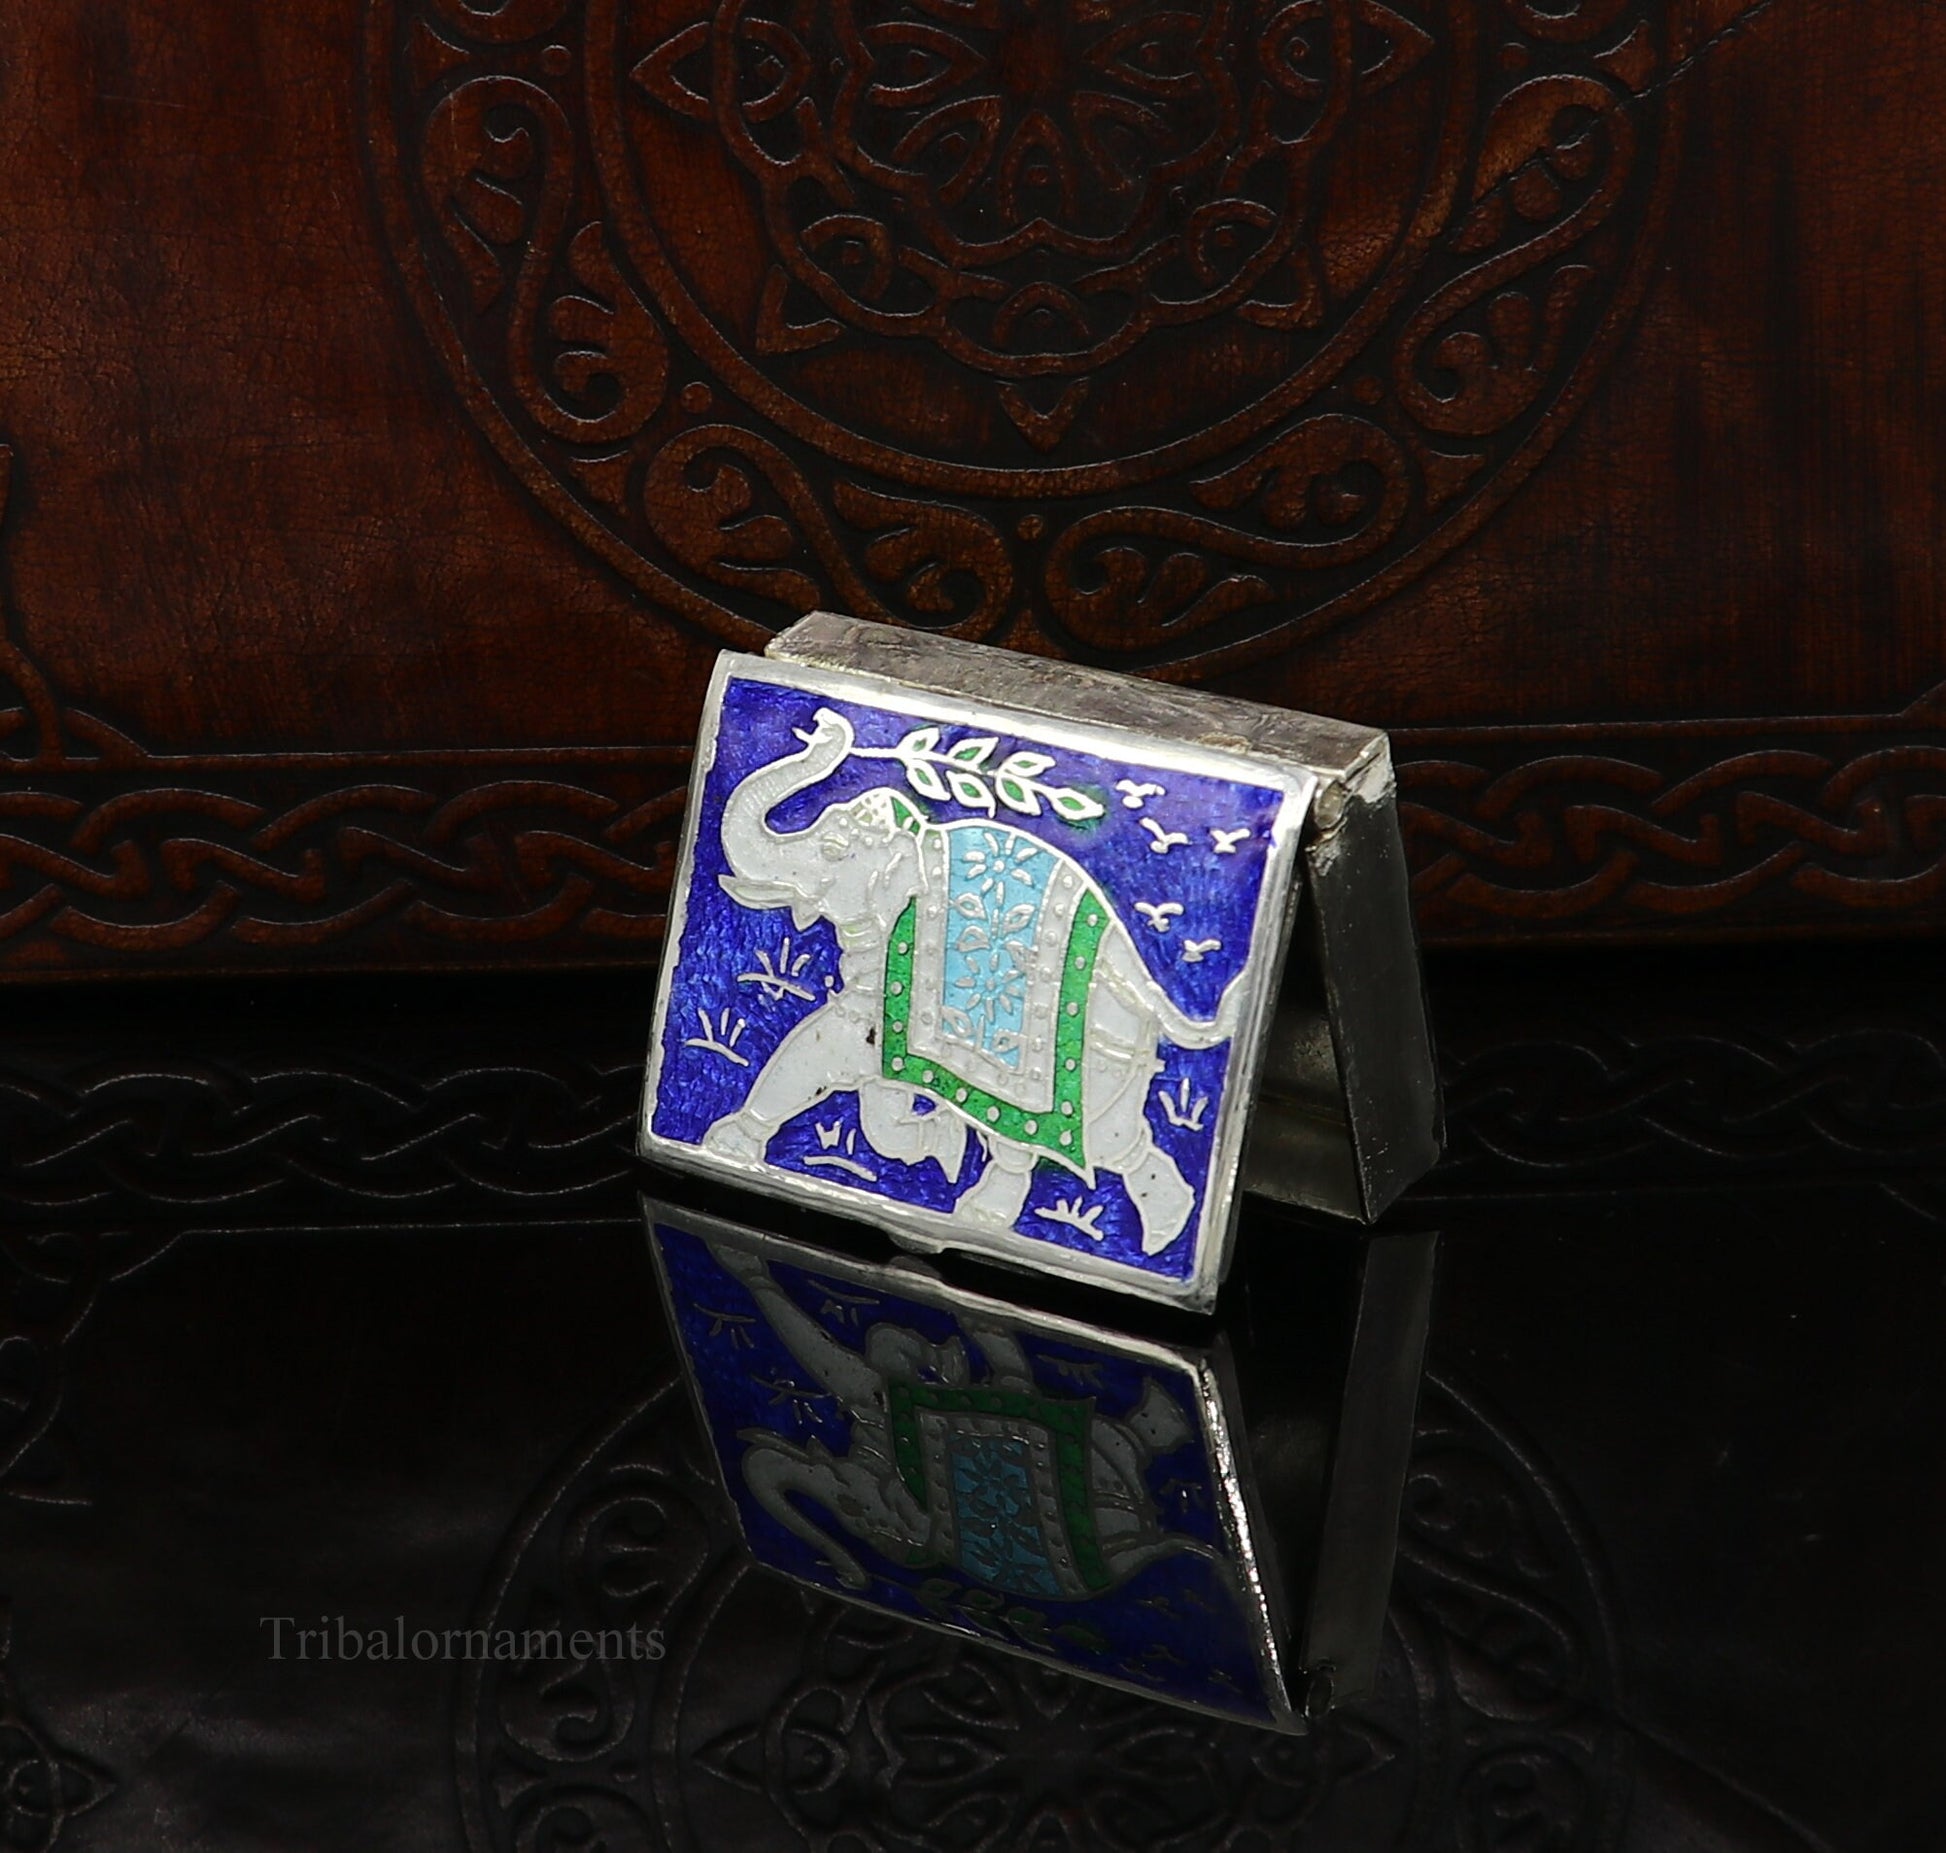 Gorgeous Handmade amazing design 925 solid silver trinket box excellent color enamel royal jewelry box cigar box stb215 - TRIBAL ORNAMENTS